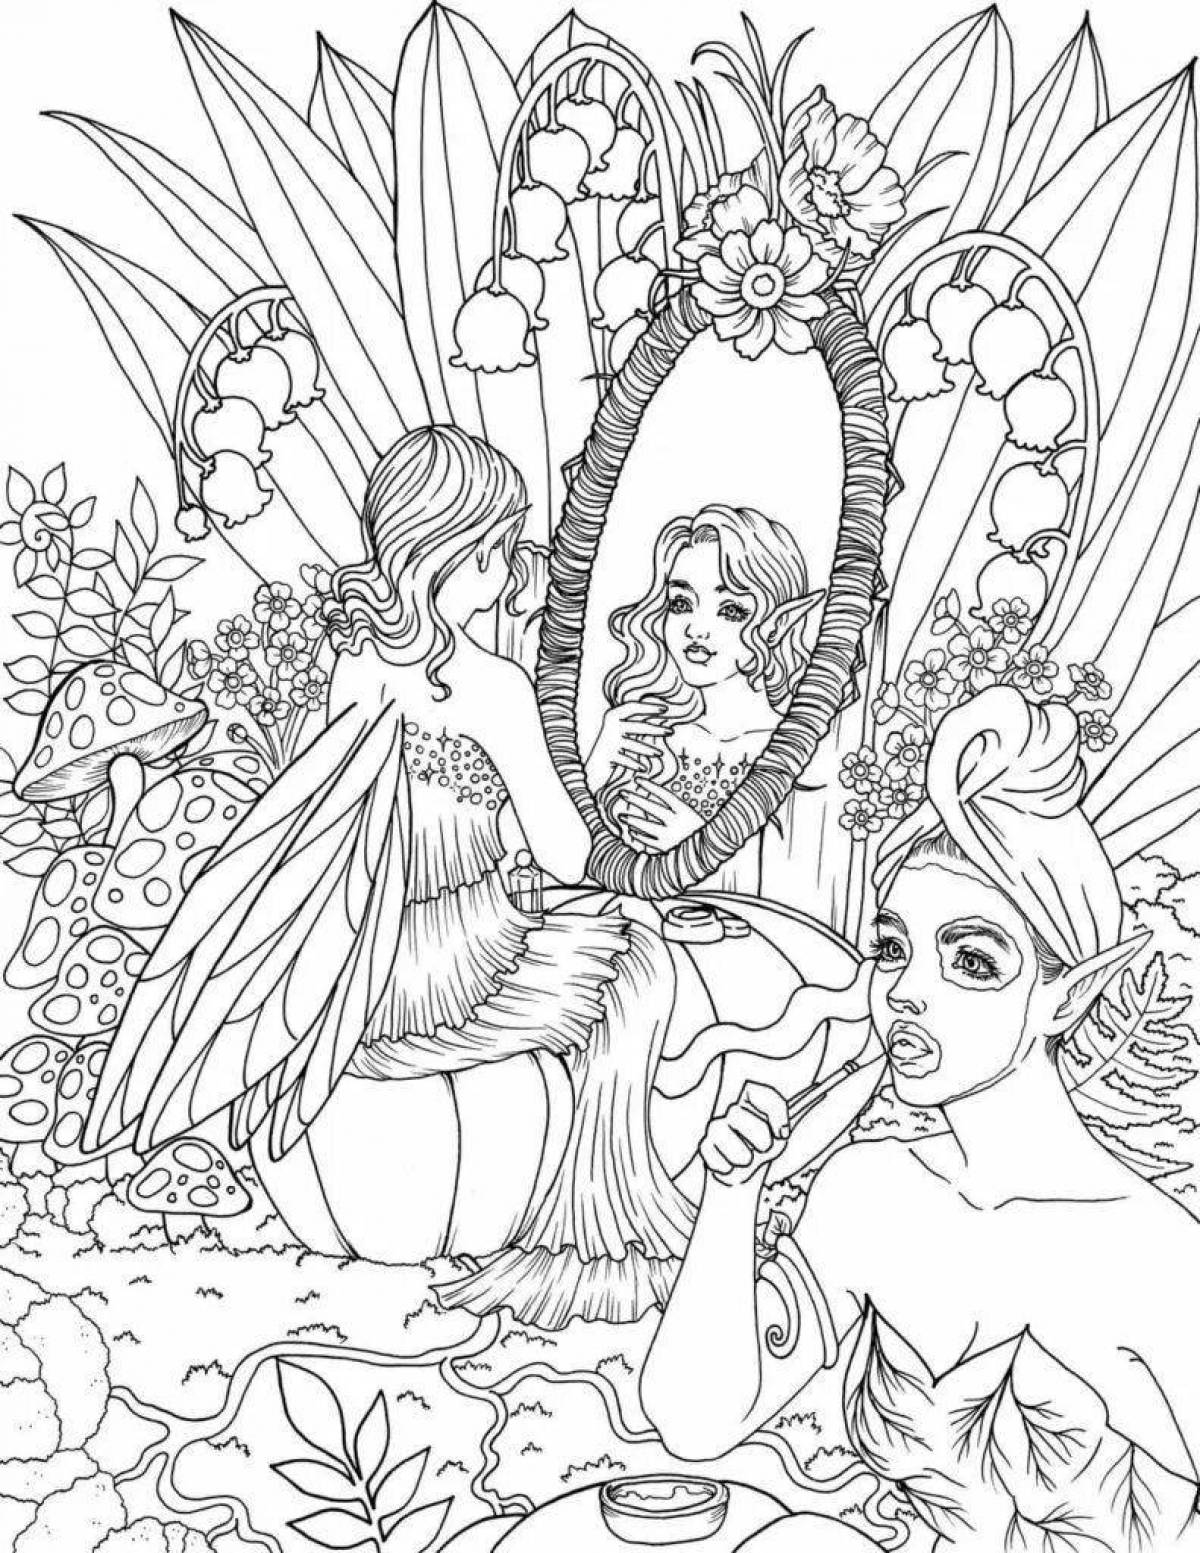 Fancy coloring of the magical world of fairies